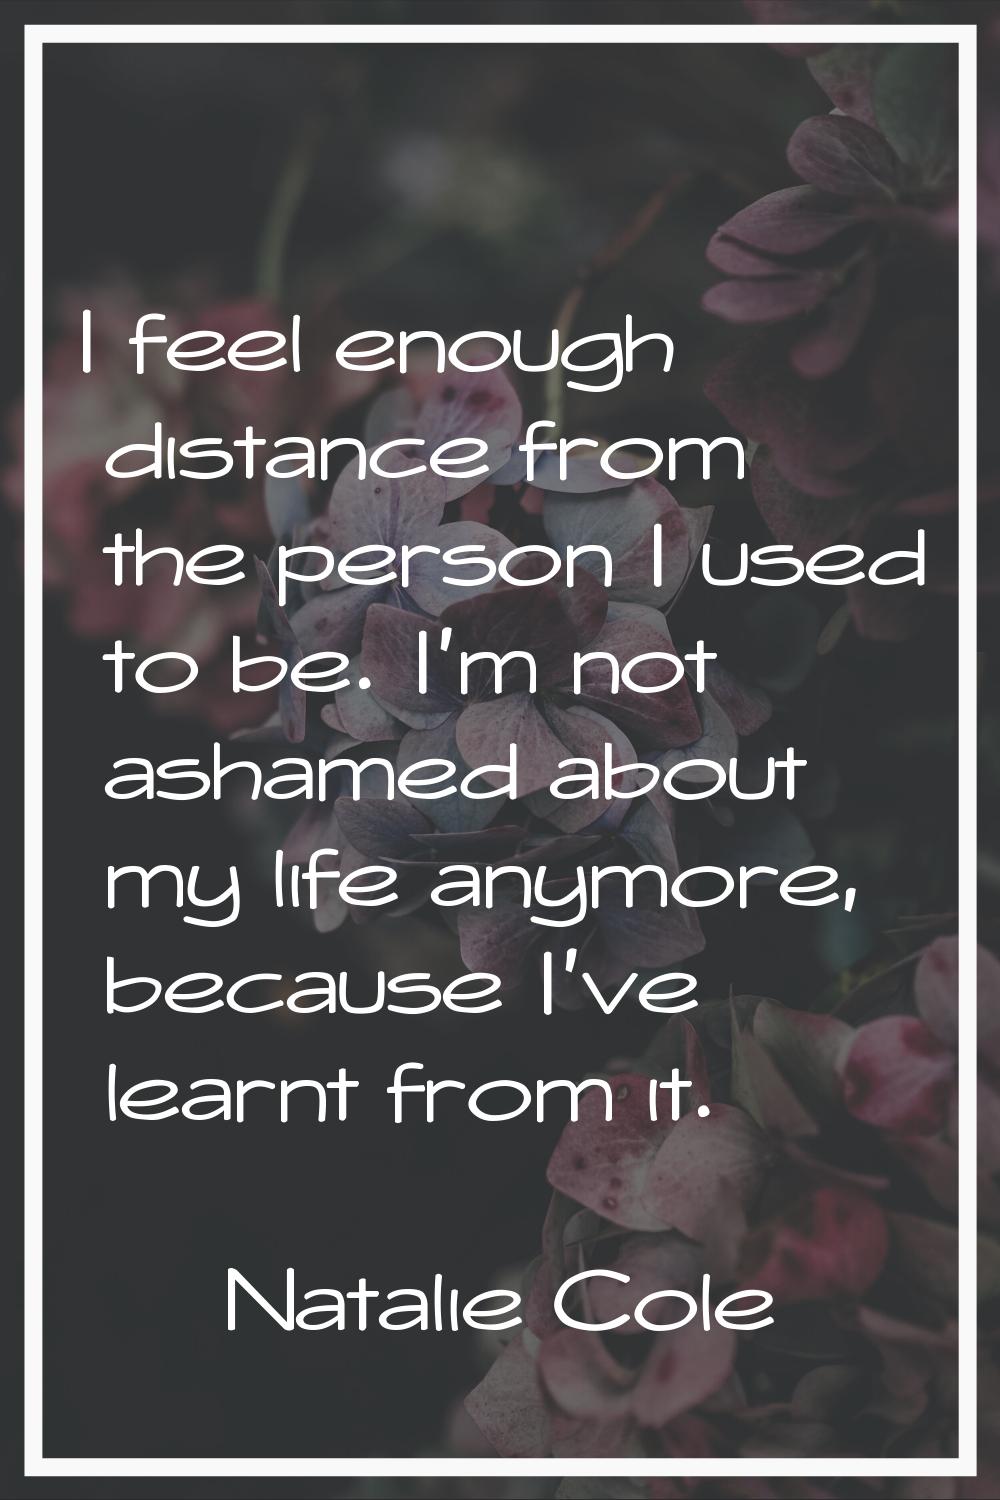 I feel enough distance from the person I used to be. I'm not ashamed about my life anymore, because